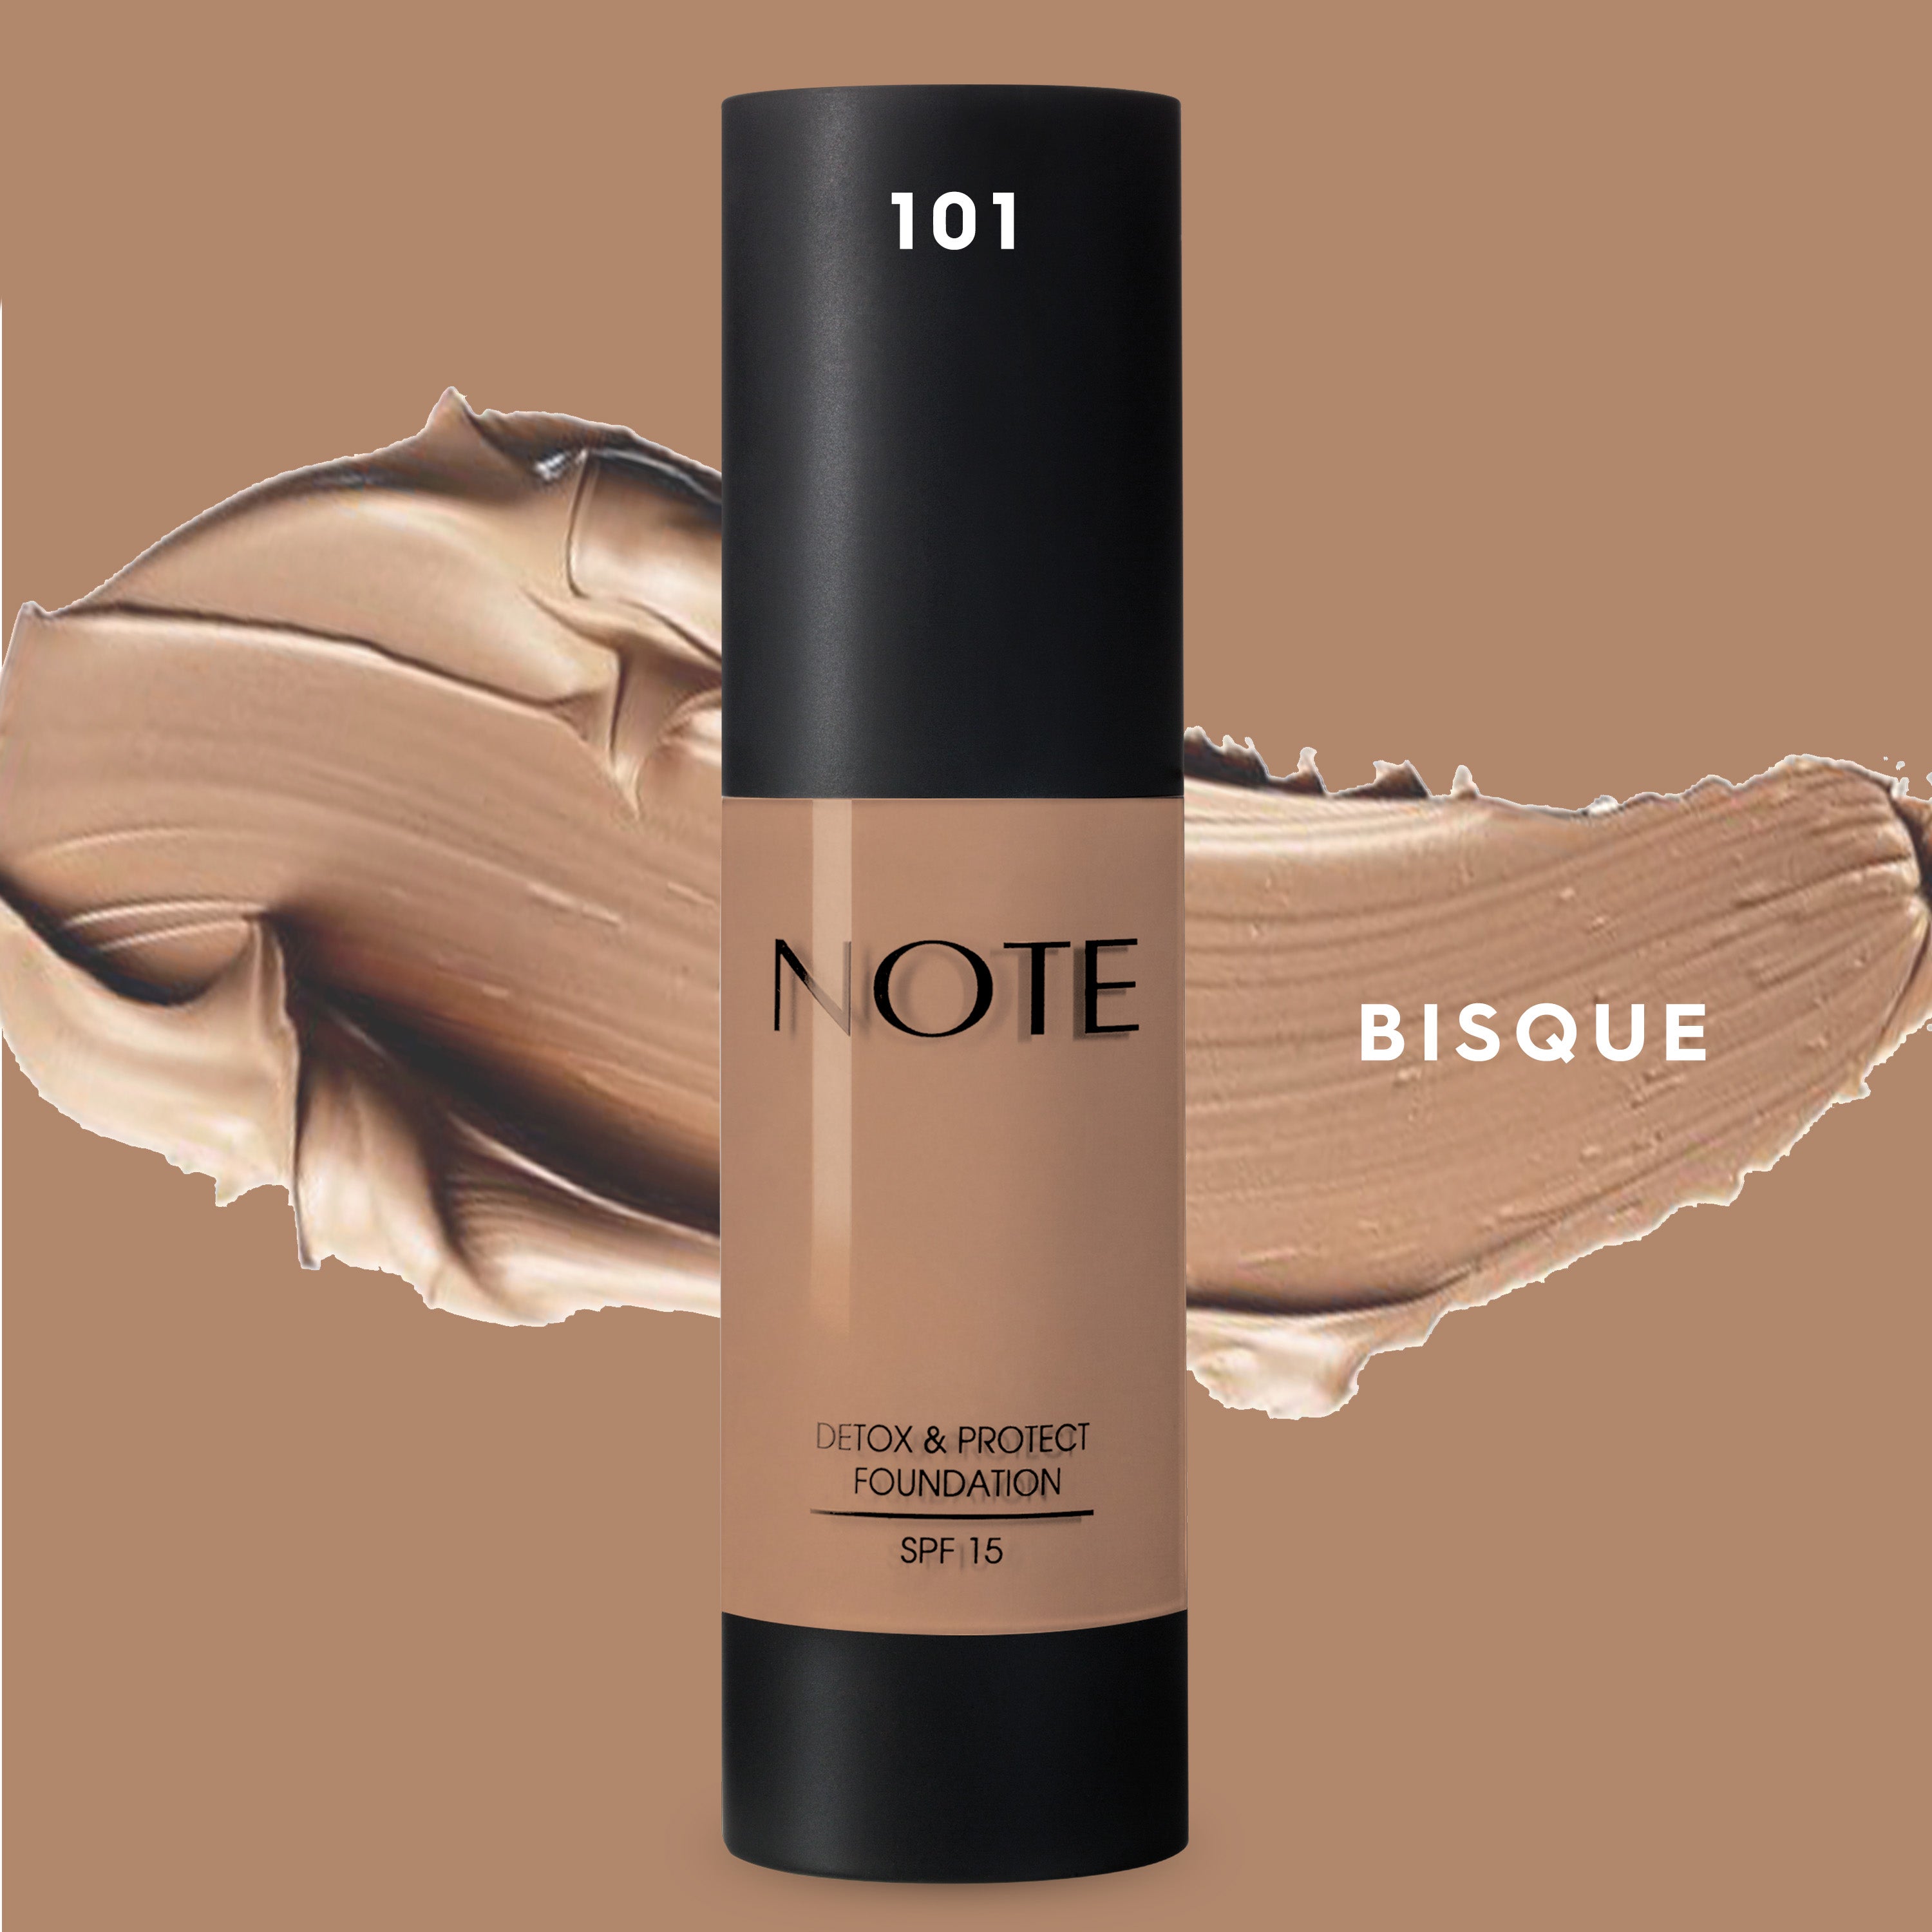 Detox and Protect Foundation Pump